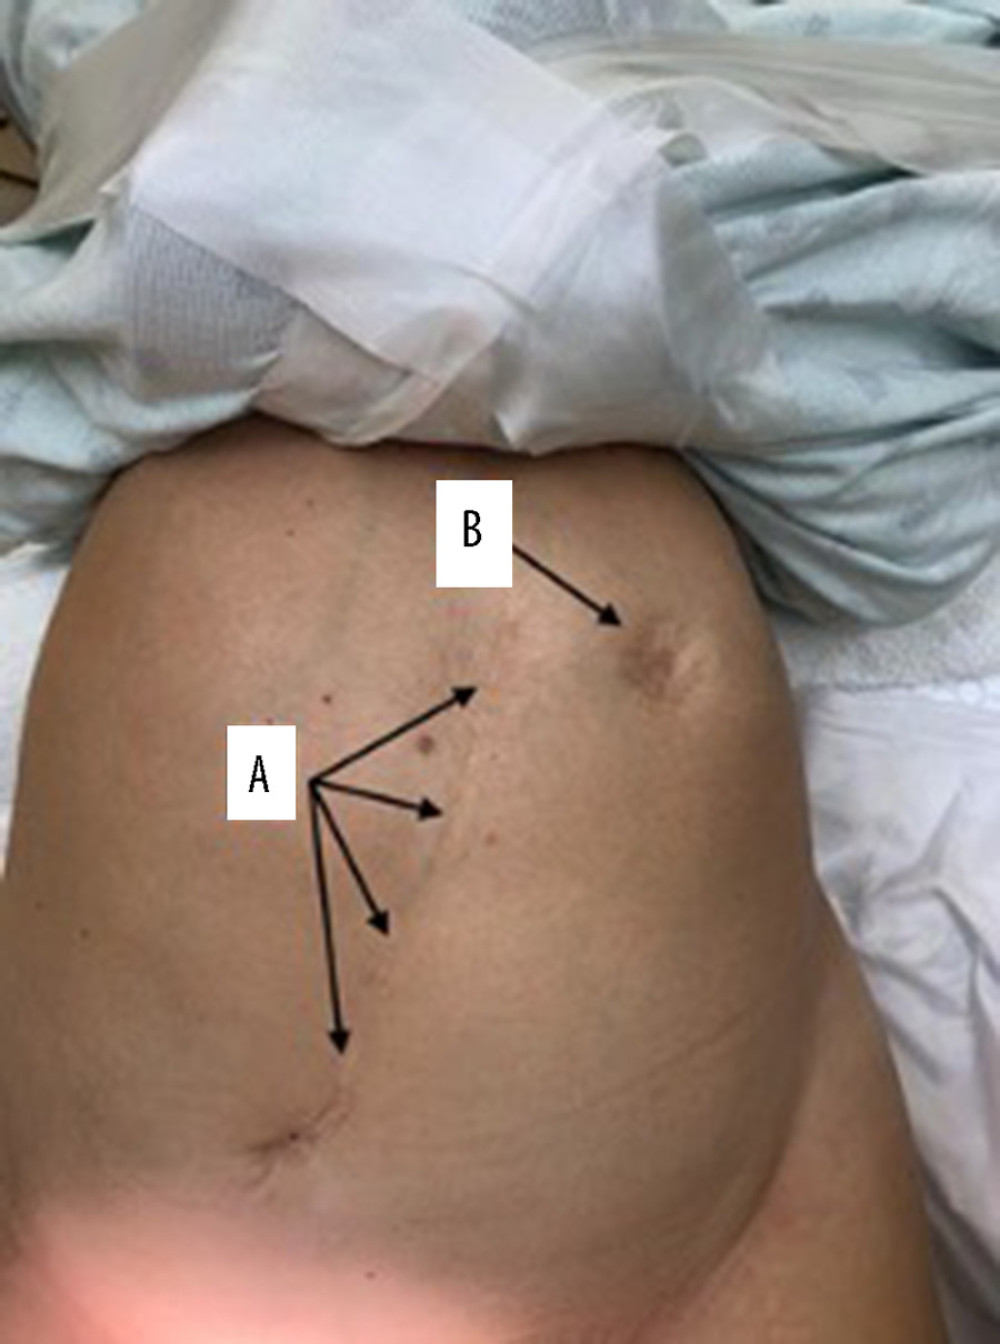 Preoperative photo showing abdominal distention and previous laparotomy scar (labeled A), and previous colostomy site in the left upper quadrant (labeled B).